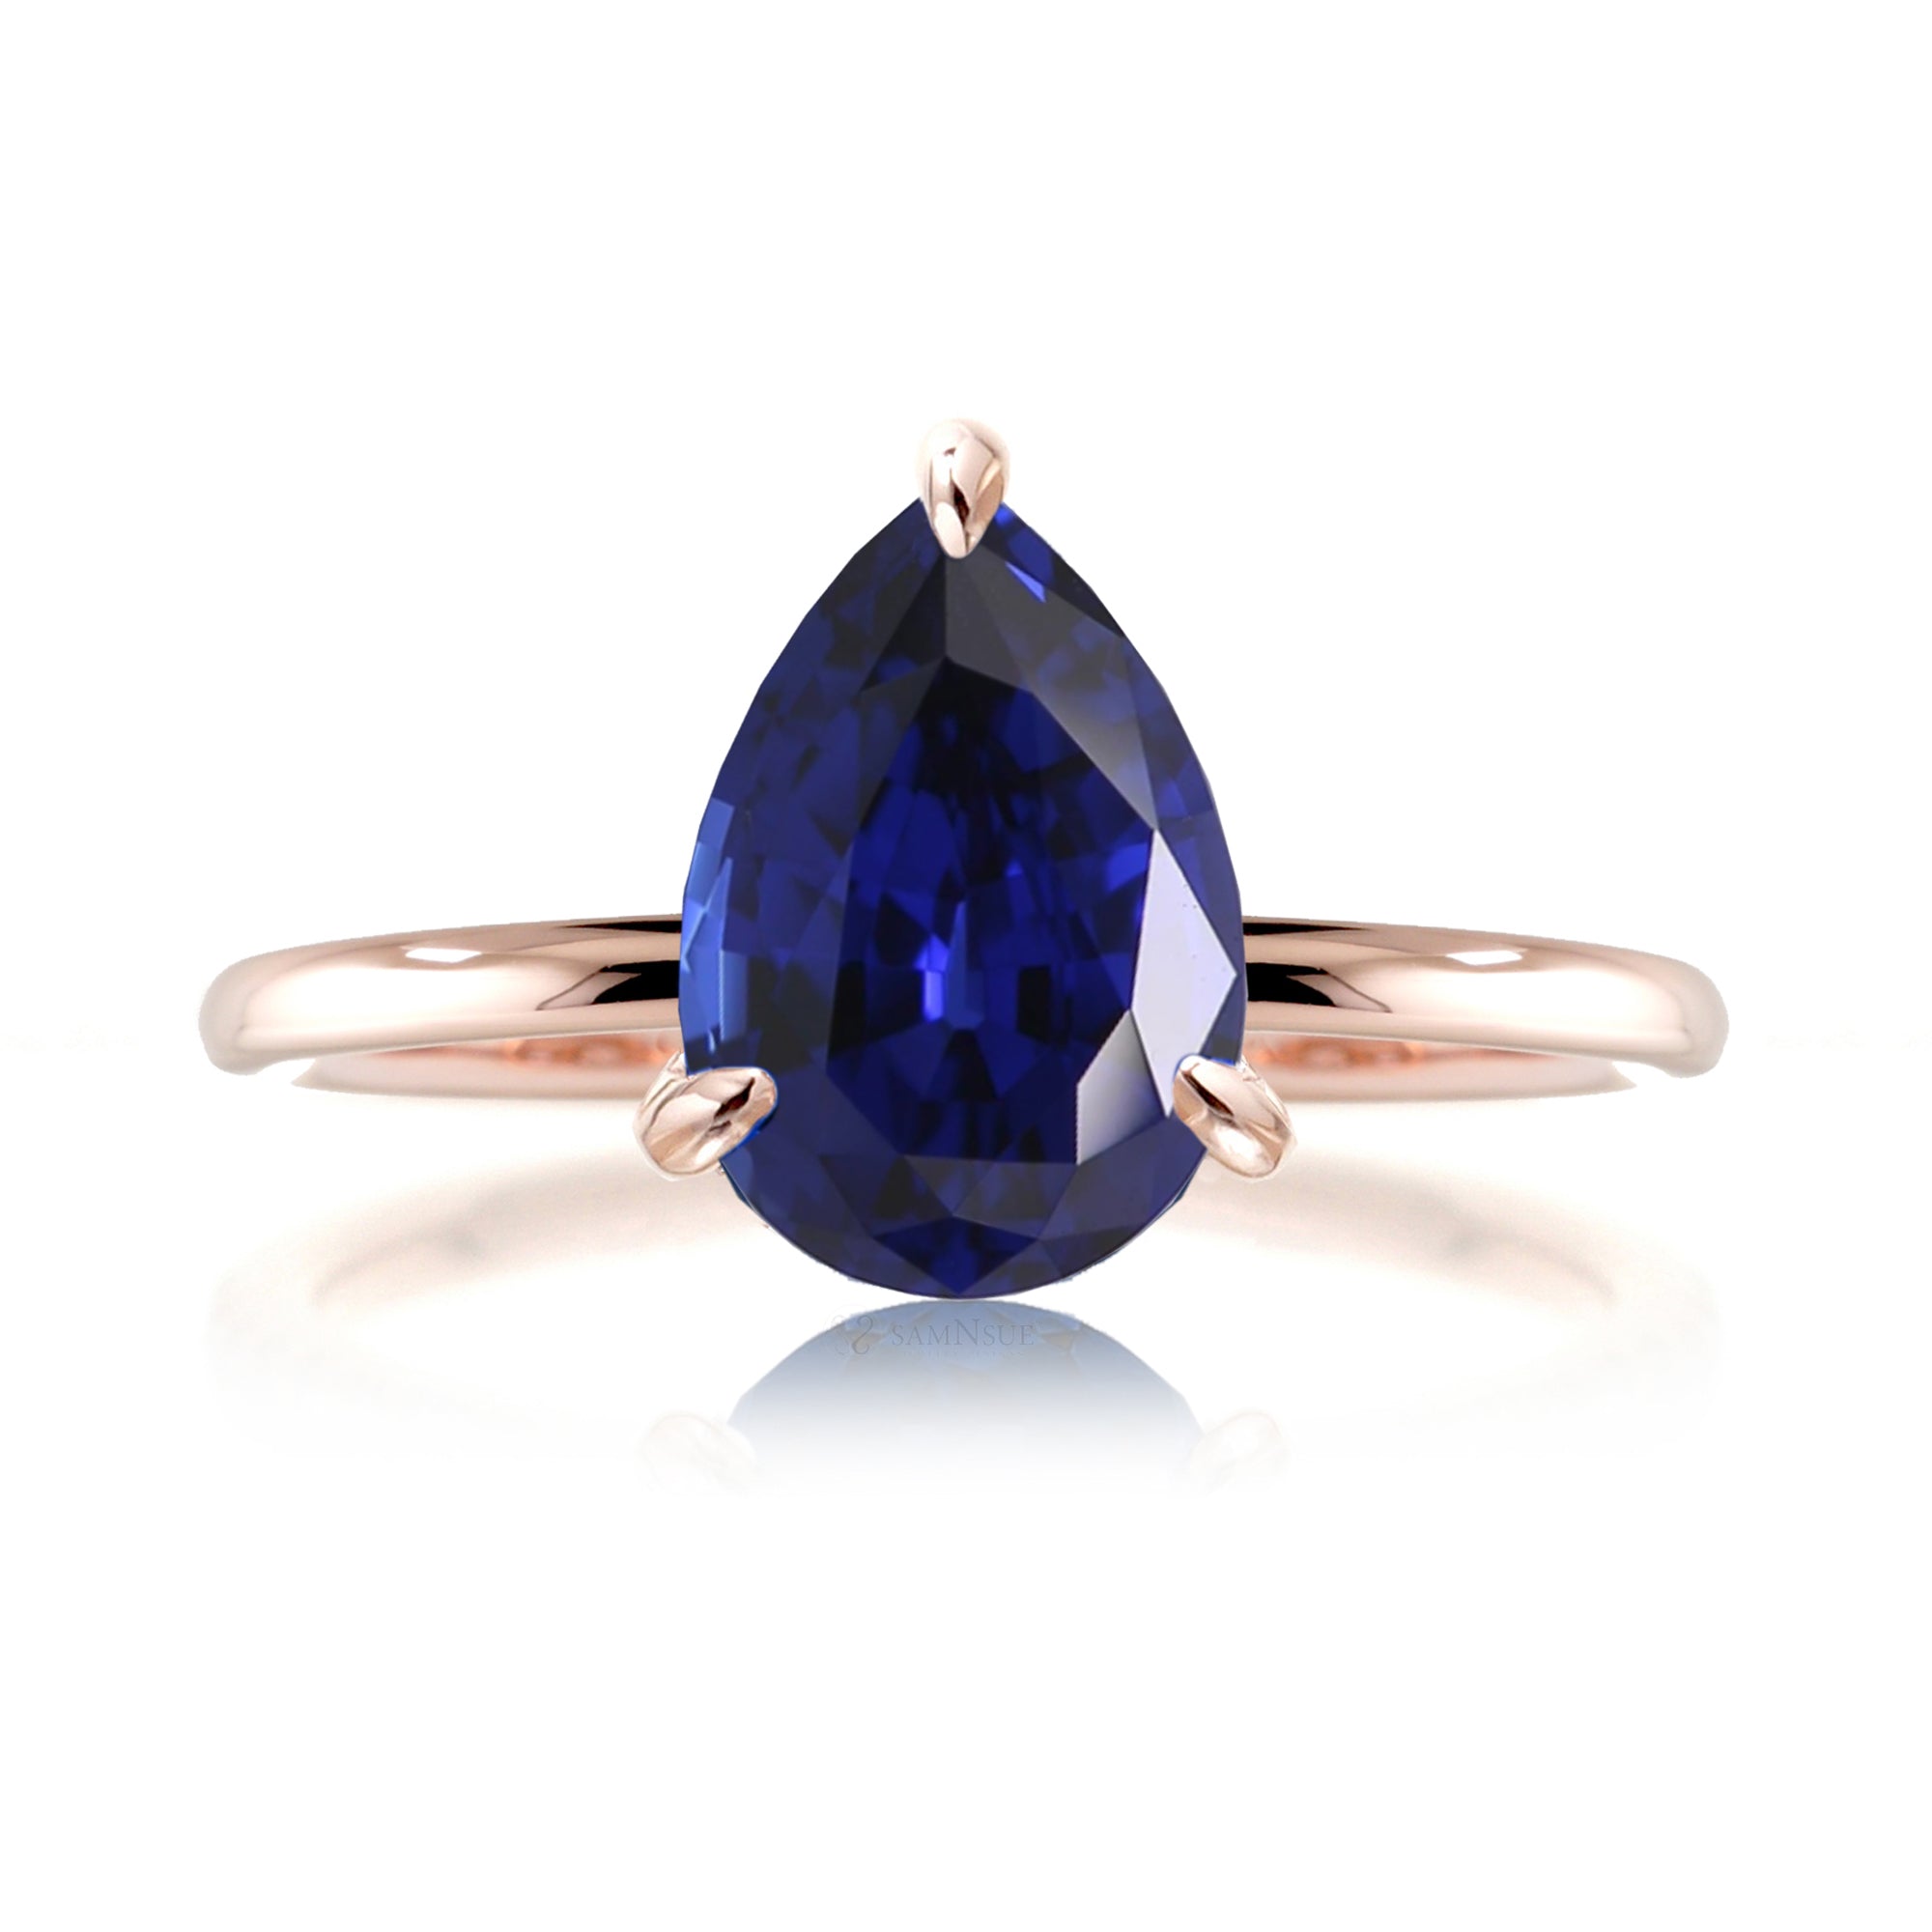 Pear cut blue sapphire solid band engagement ring rose gold - the Ava